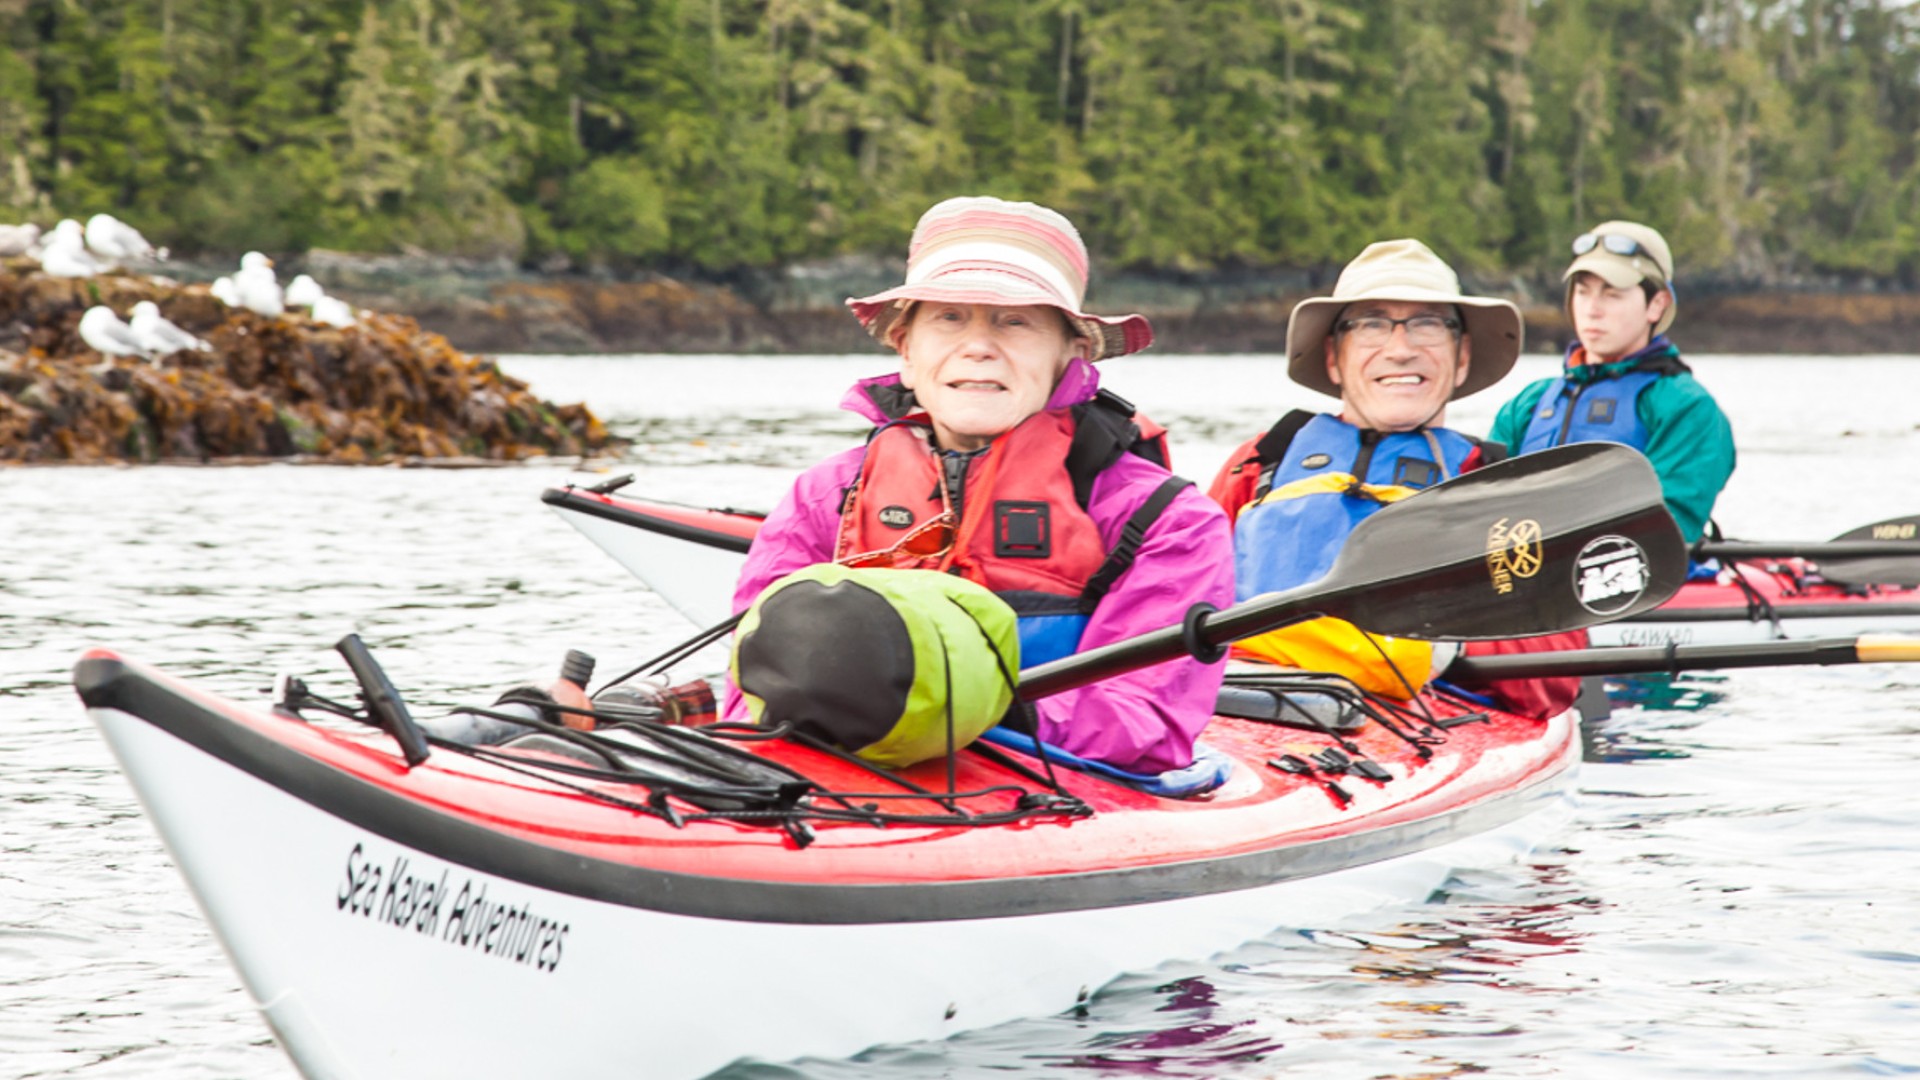 People in a tandem sea kayak smiling in the Johnstone Strait off the coast of Vancouver Island